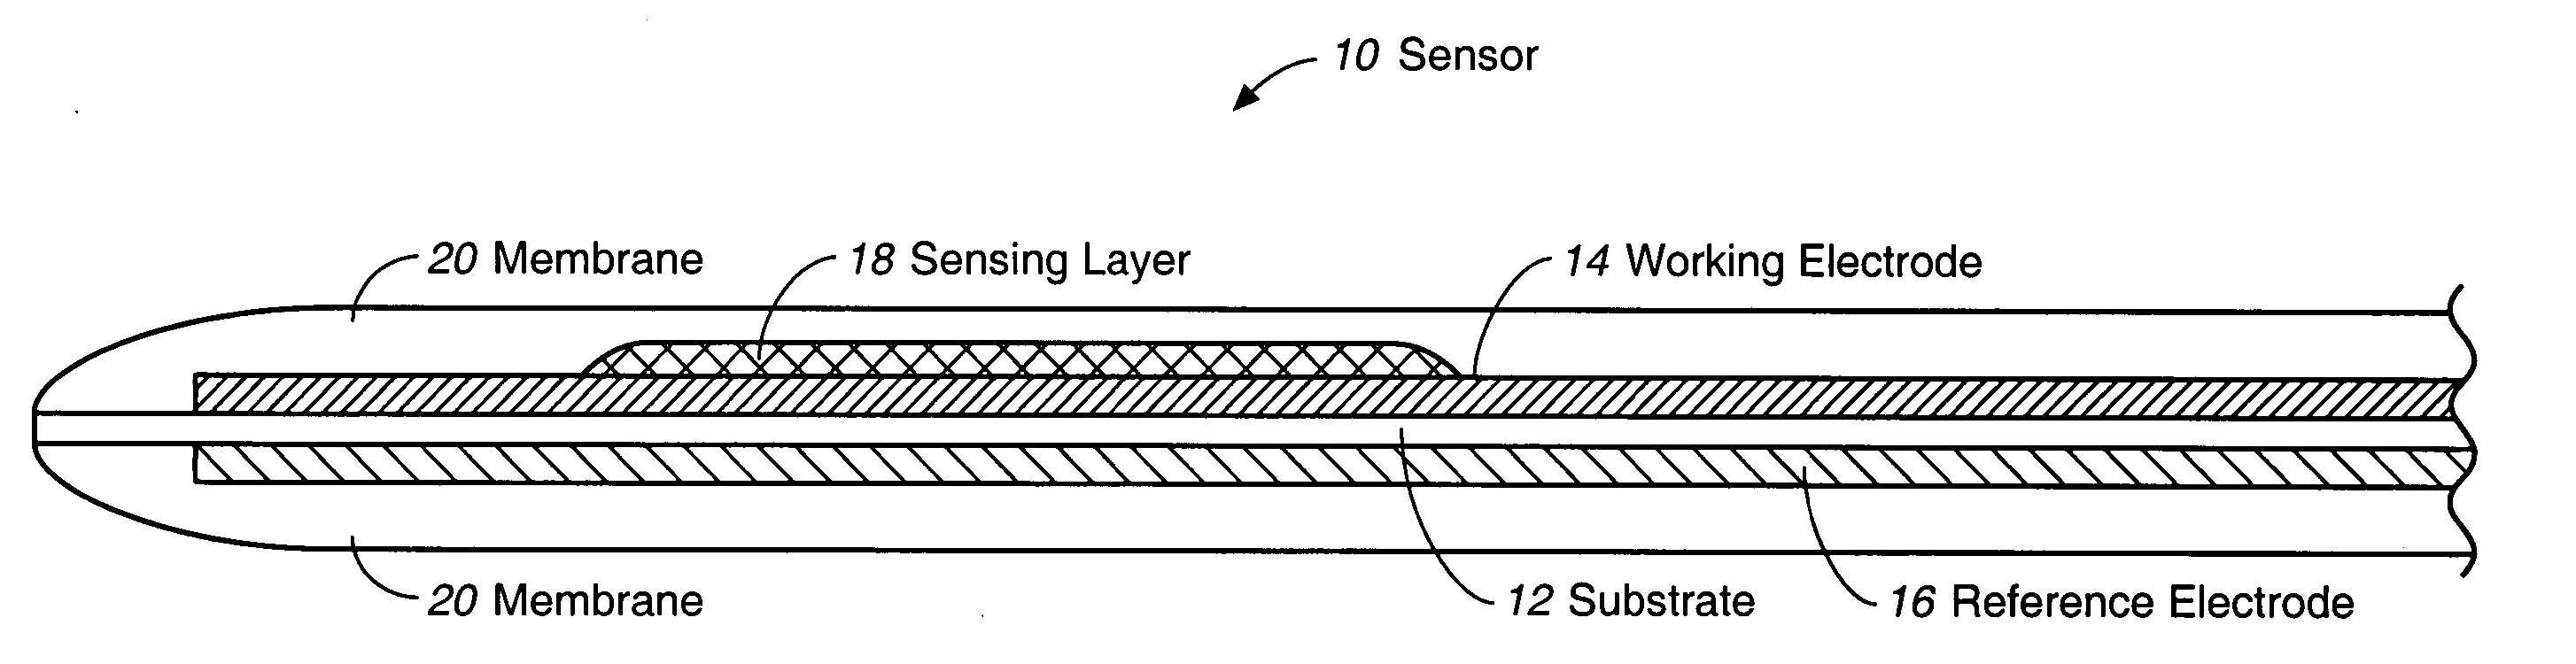 Membrane suitable for use in an analyte sensor, analyte sensor, and associated method